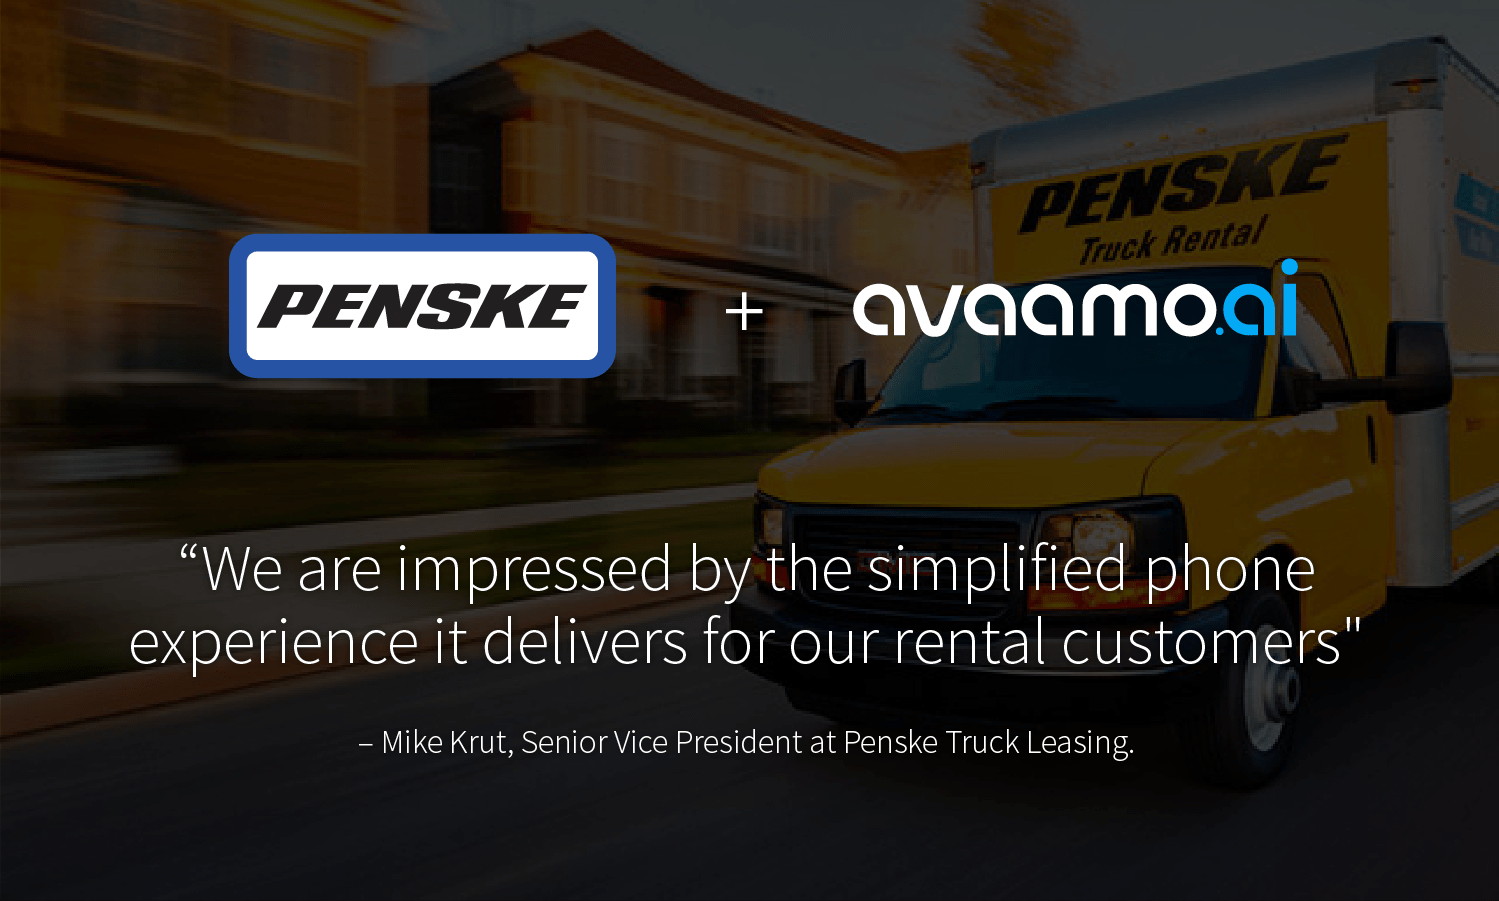 Penske selects Avaamo for conversational ai for digital agents